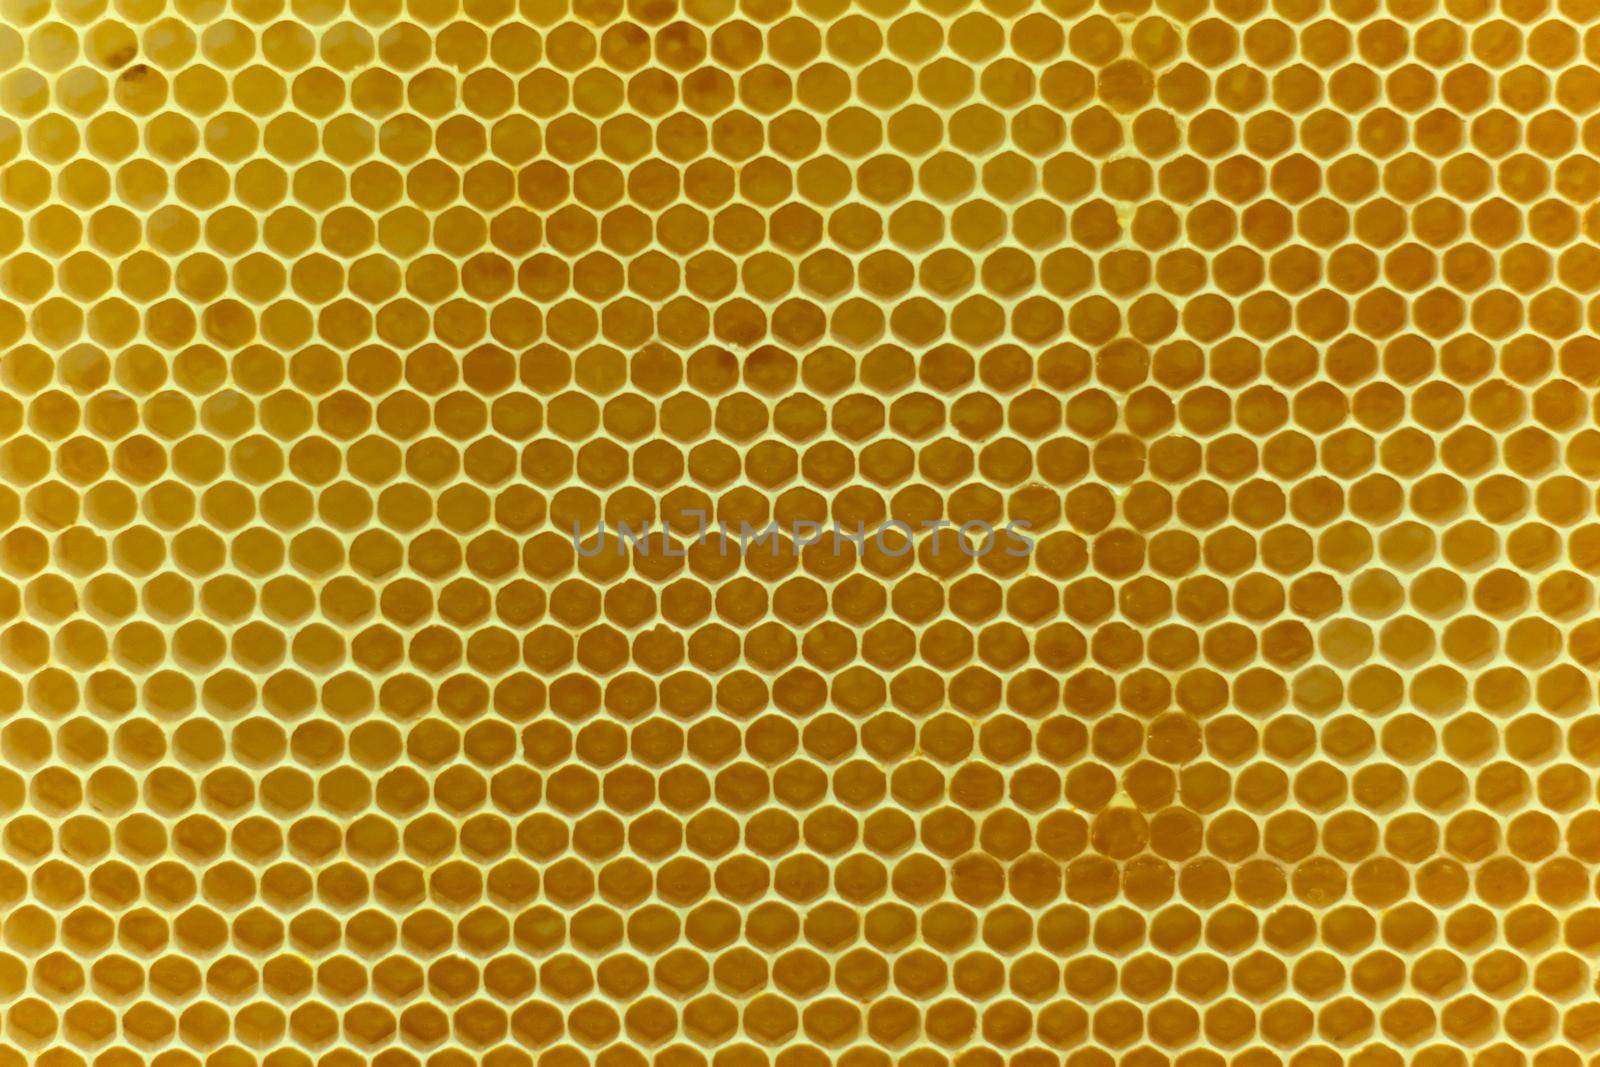 Real golden beewax honeycombs nature abstract pattern texture background